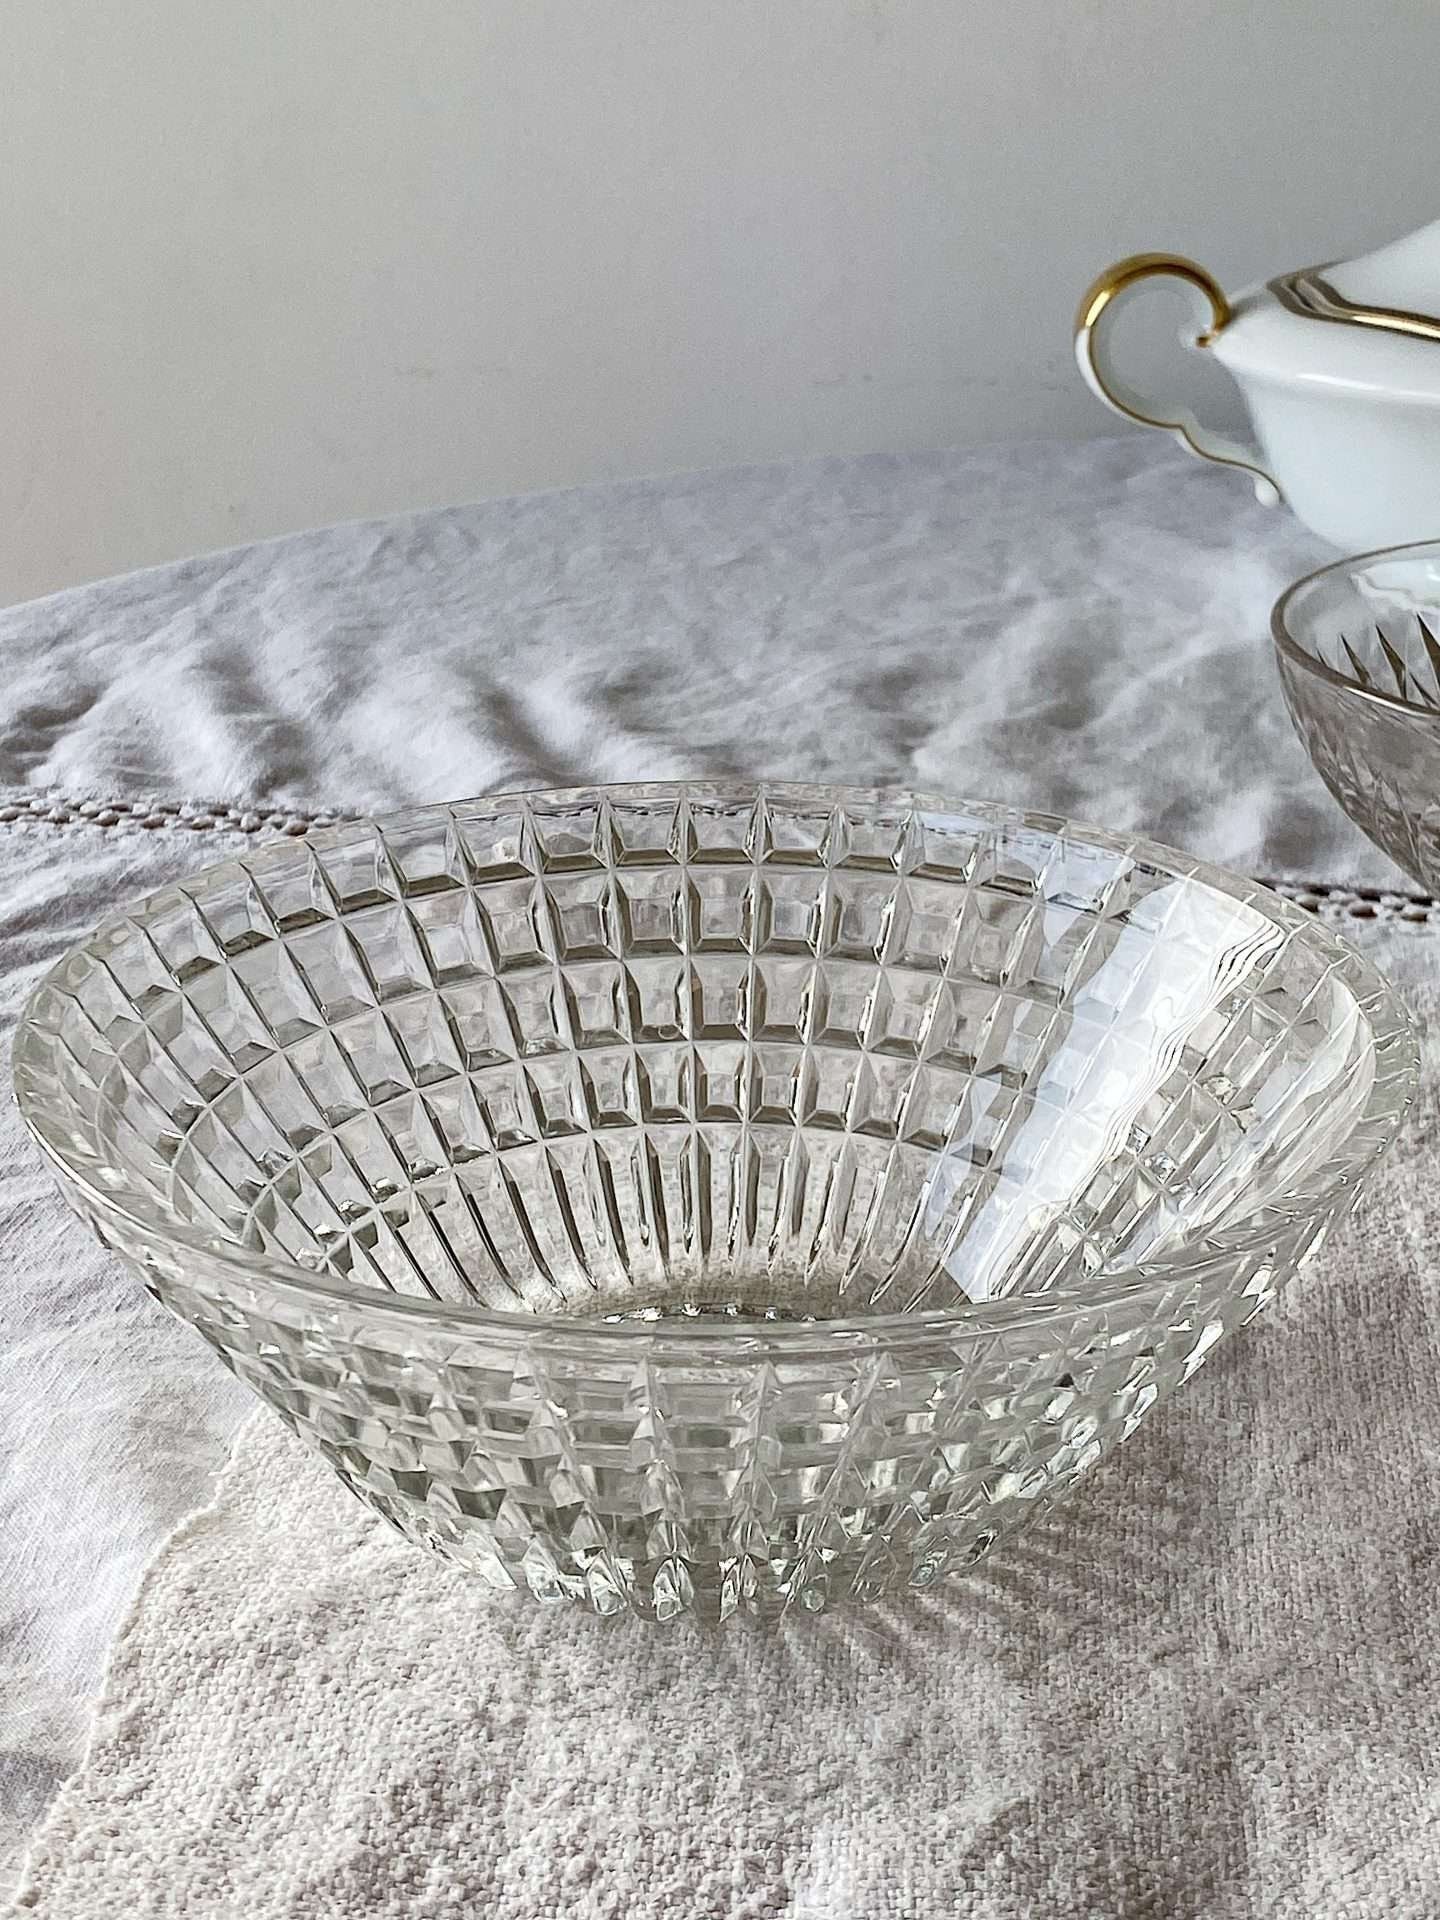 Stock Fast Delivery Glass Bowl High White Glass Serving Bowl Salad